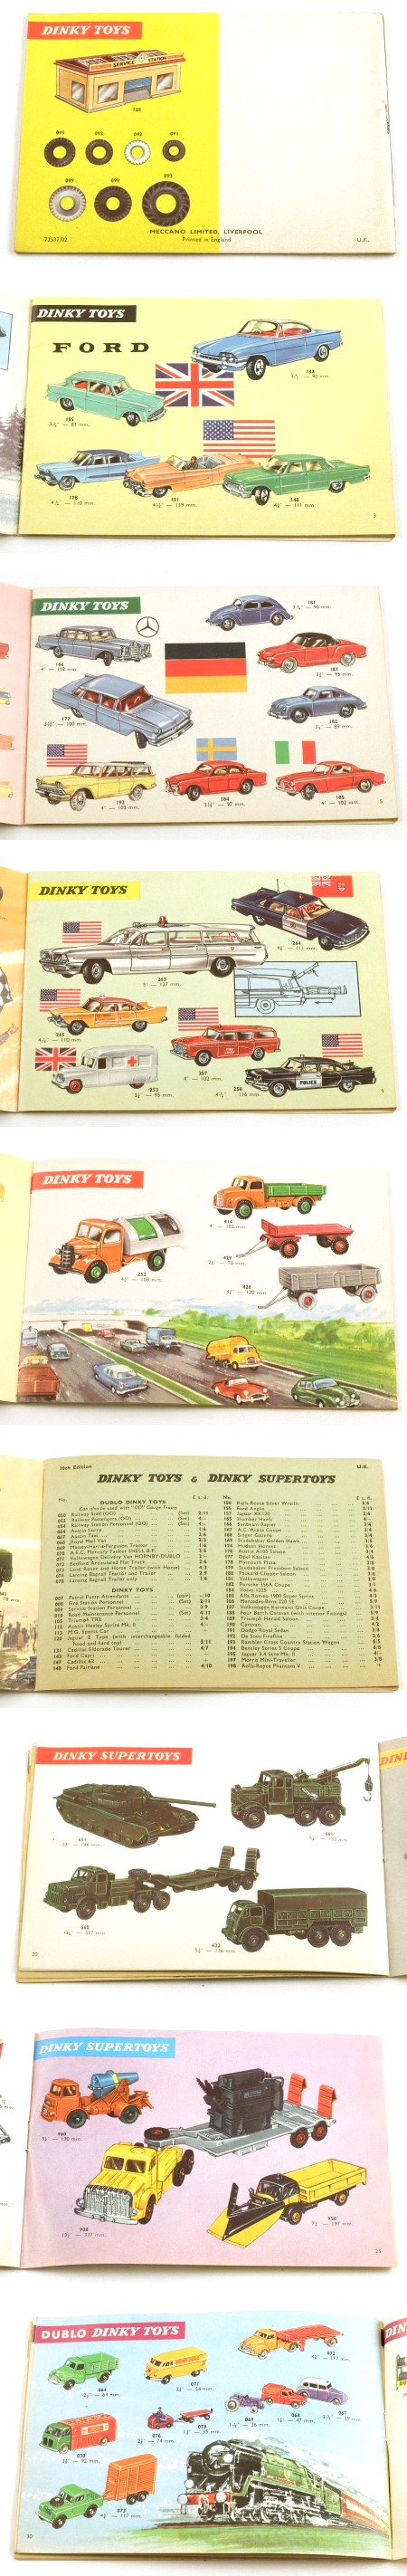 Dinky Toys 1962 Catalogue 10th edition